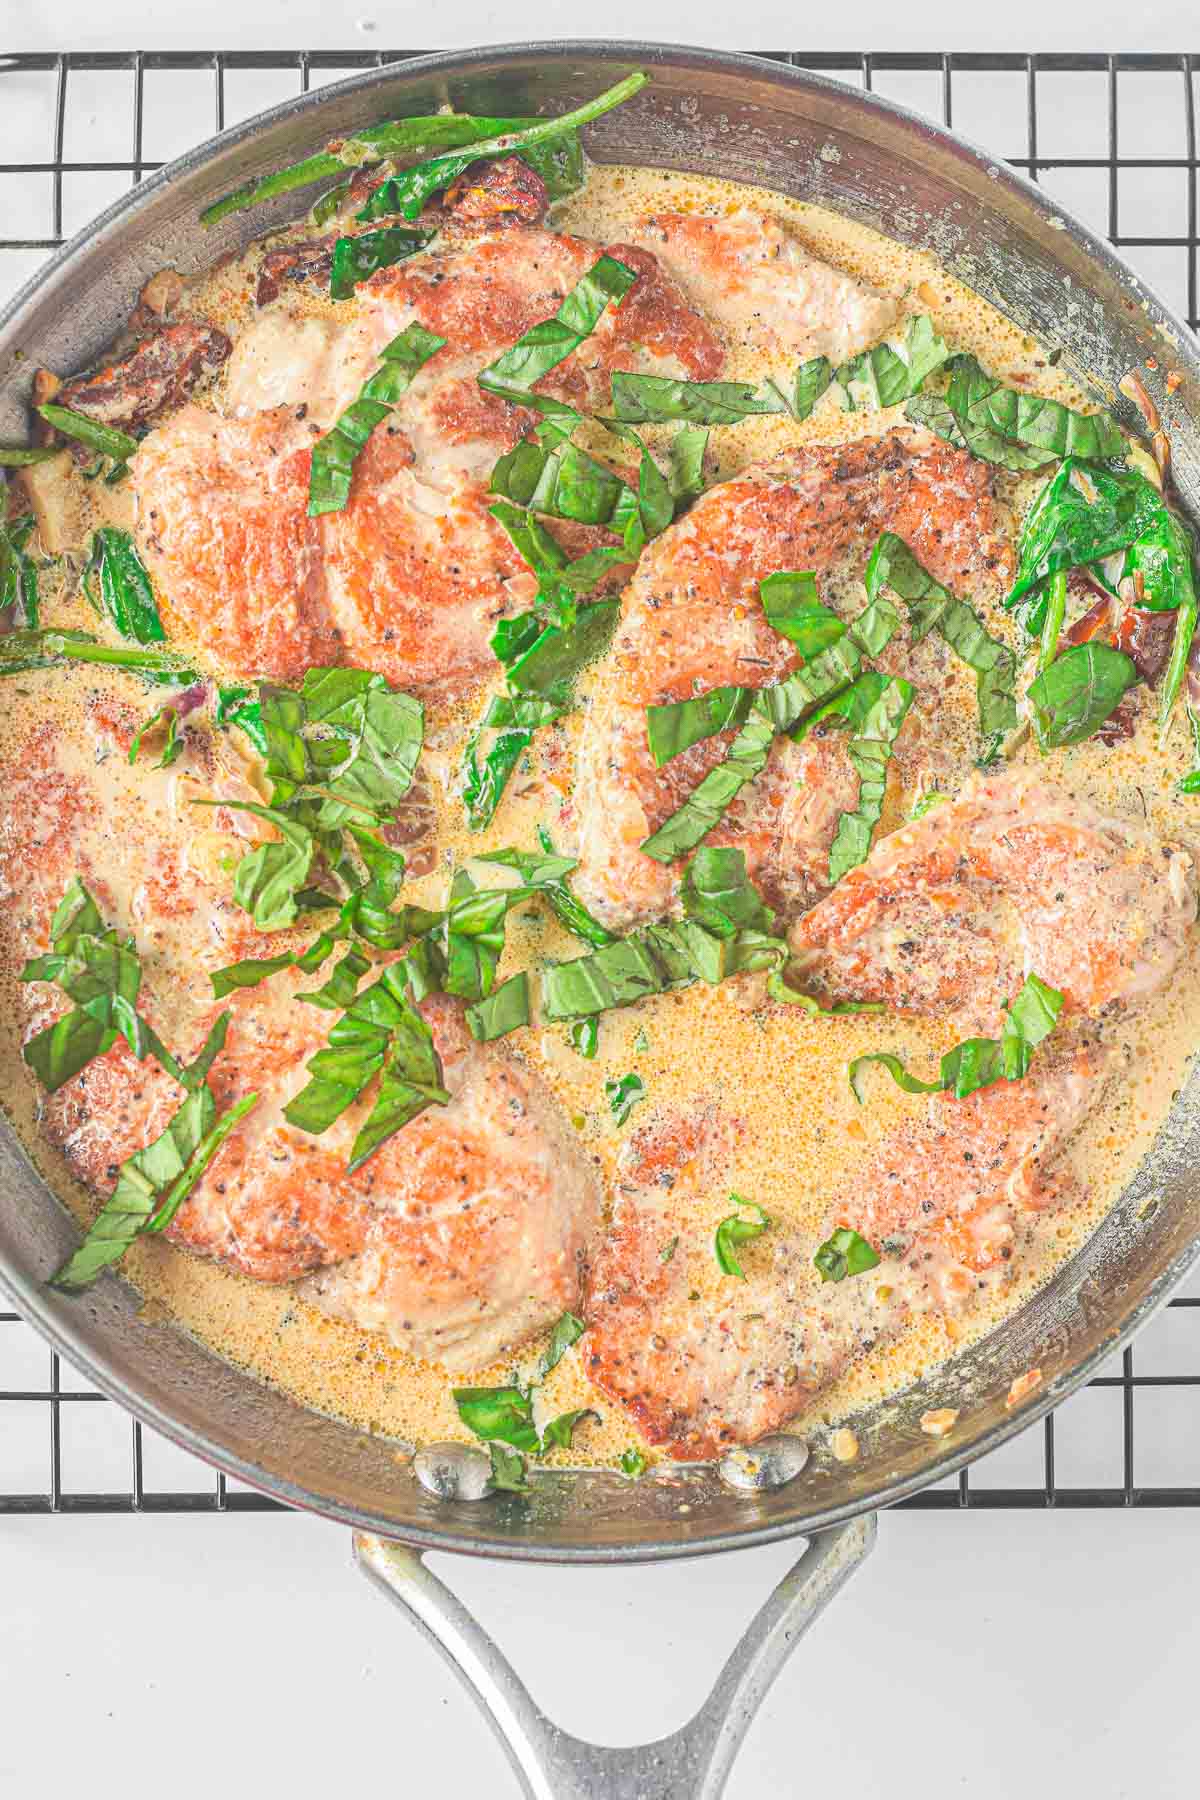 stainless steel skillet full of a tuscan chicken recipe with sun-dried tomatoes, spinach in a creamy sauce.